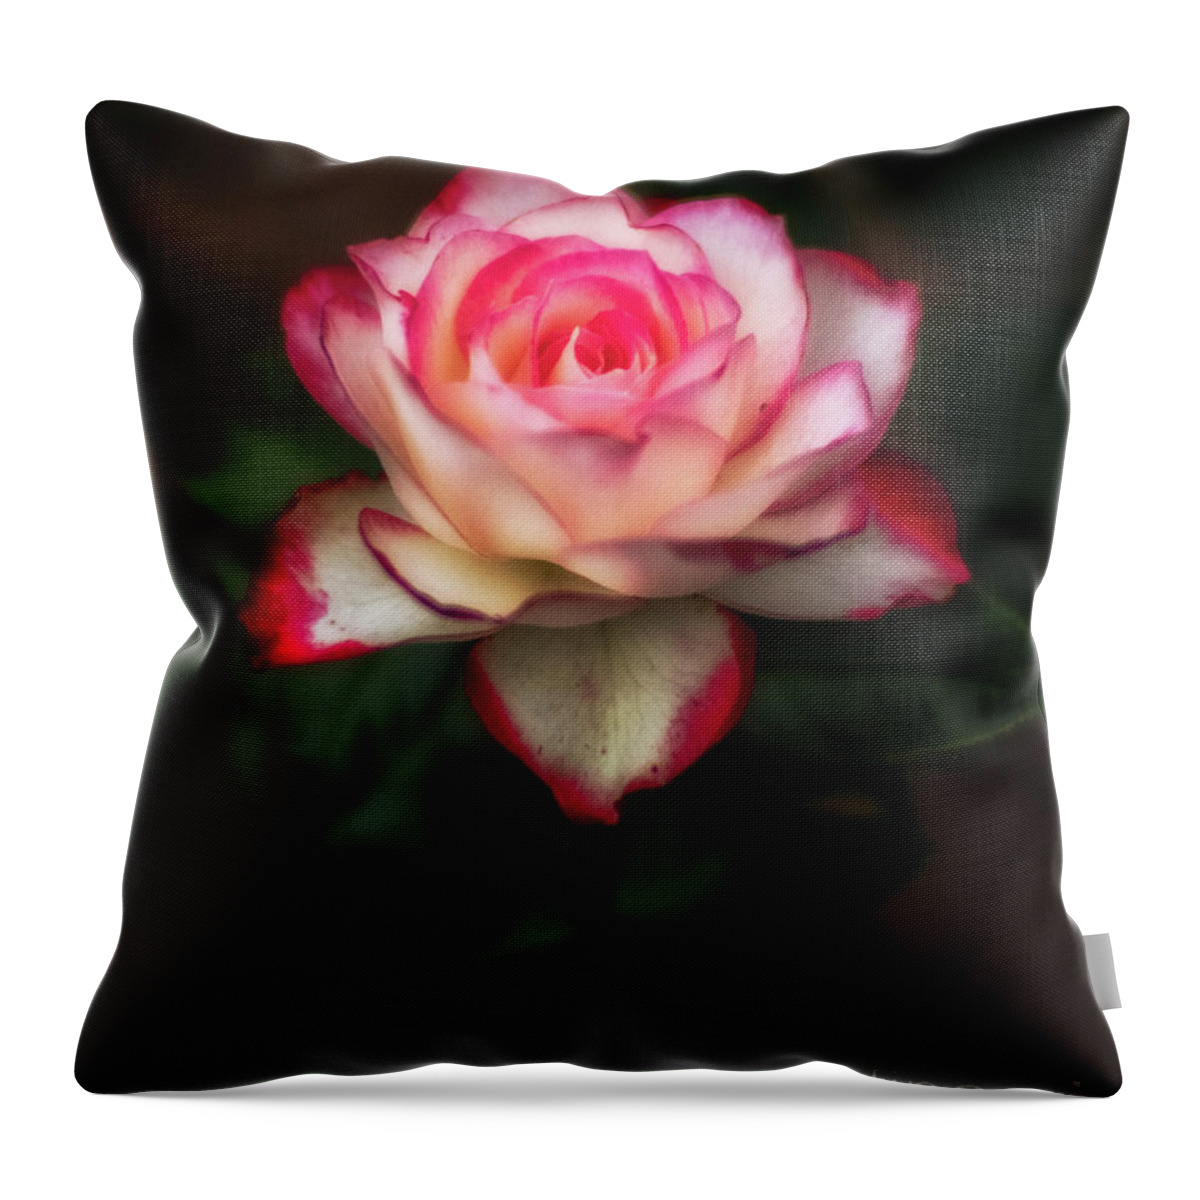 Anniversary Throw Pillow featuring the photograph Rose by Bill Frische